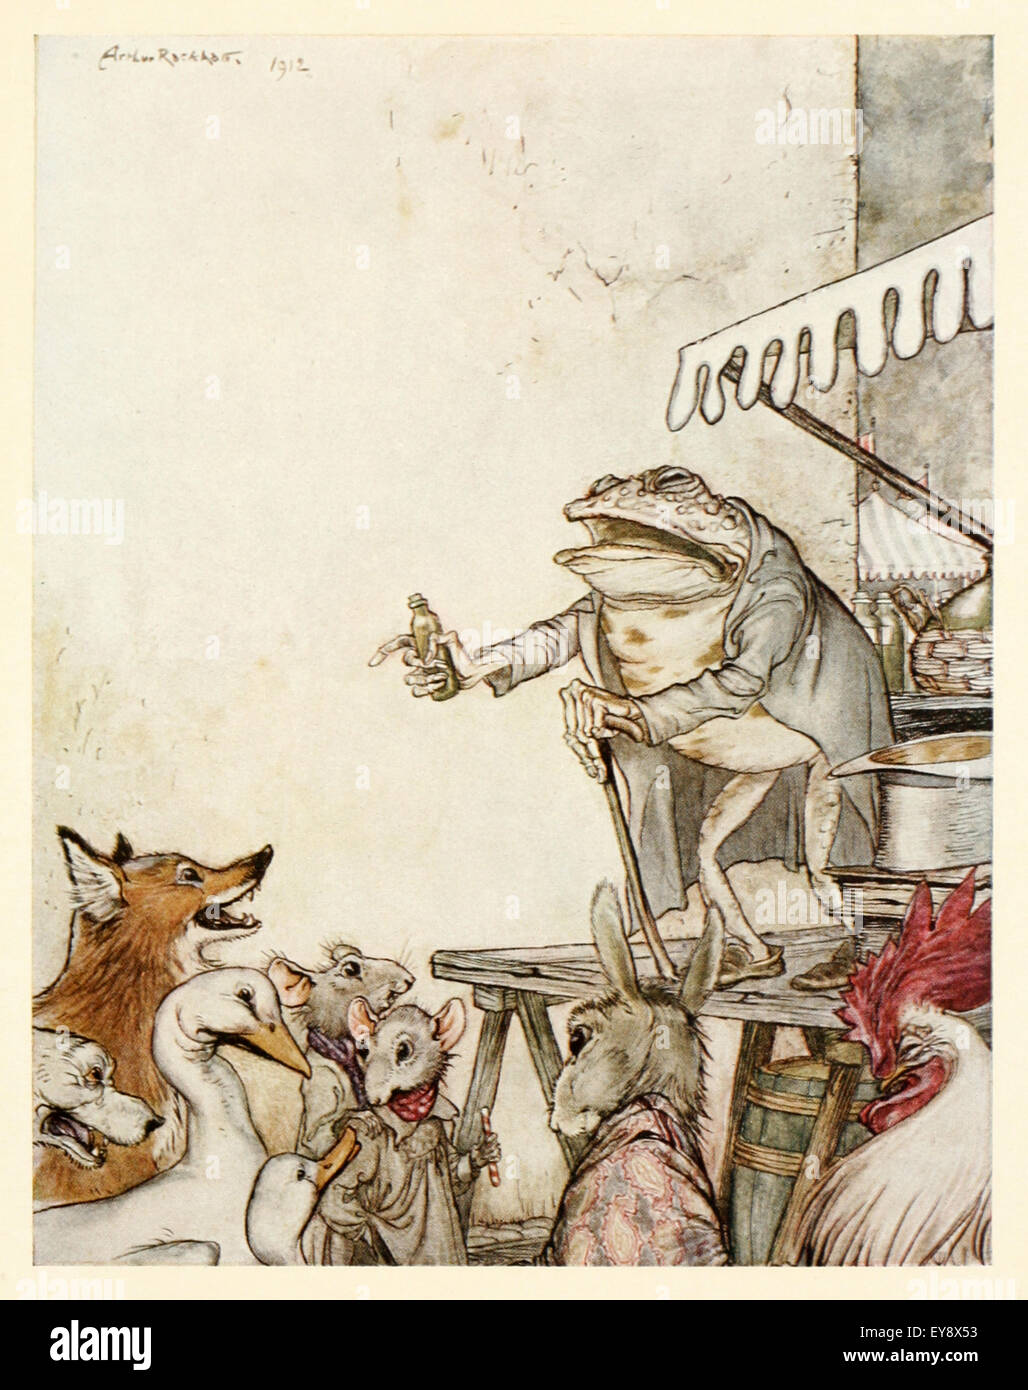 'The Quack Frog' fable by Aesop (circa 600BC). A Frog proclaimed himself a physician. A Fox asked the Frog how he can cure others when he can’t cure his own wrinkled appearance. Physician, heal thyself. Illustration by Arthur Rackham (1867-1939). See description for more information. Stock Photo